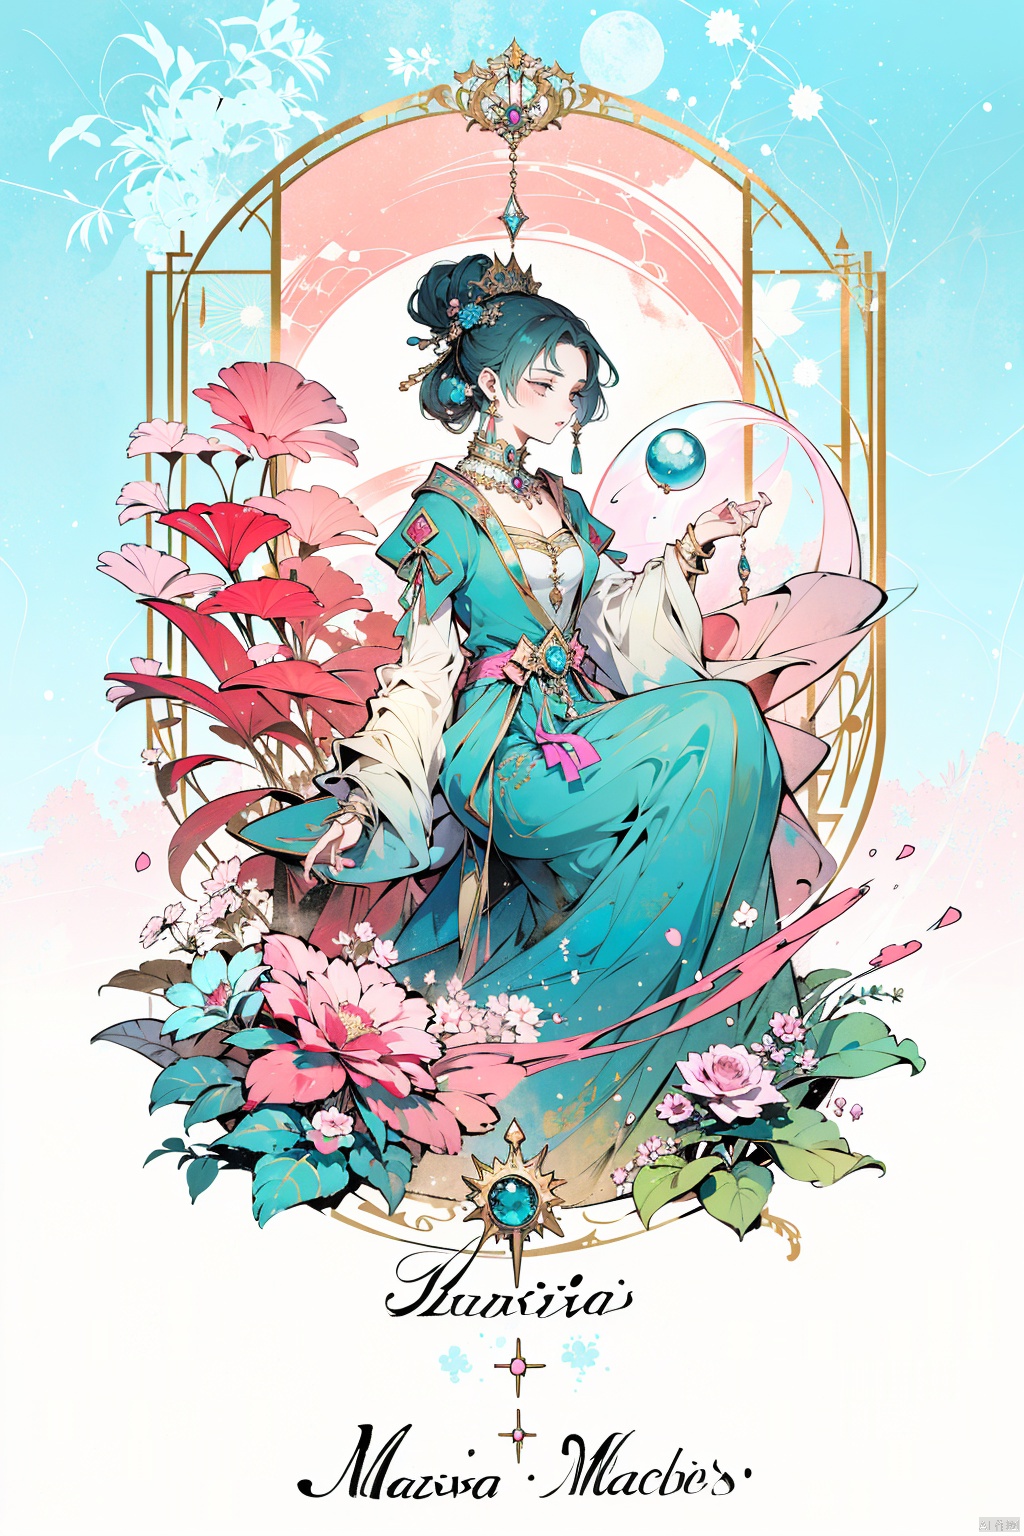  A girl holds a crystal ball, crystal decoration, flower decoration, princess skirt, jewelry box, dream, pink, green and blue, sky background, the highest masterpiece, manga stylr, makoto, Tarot style.